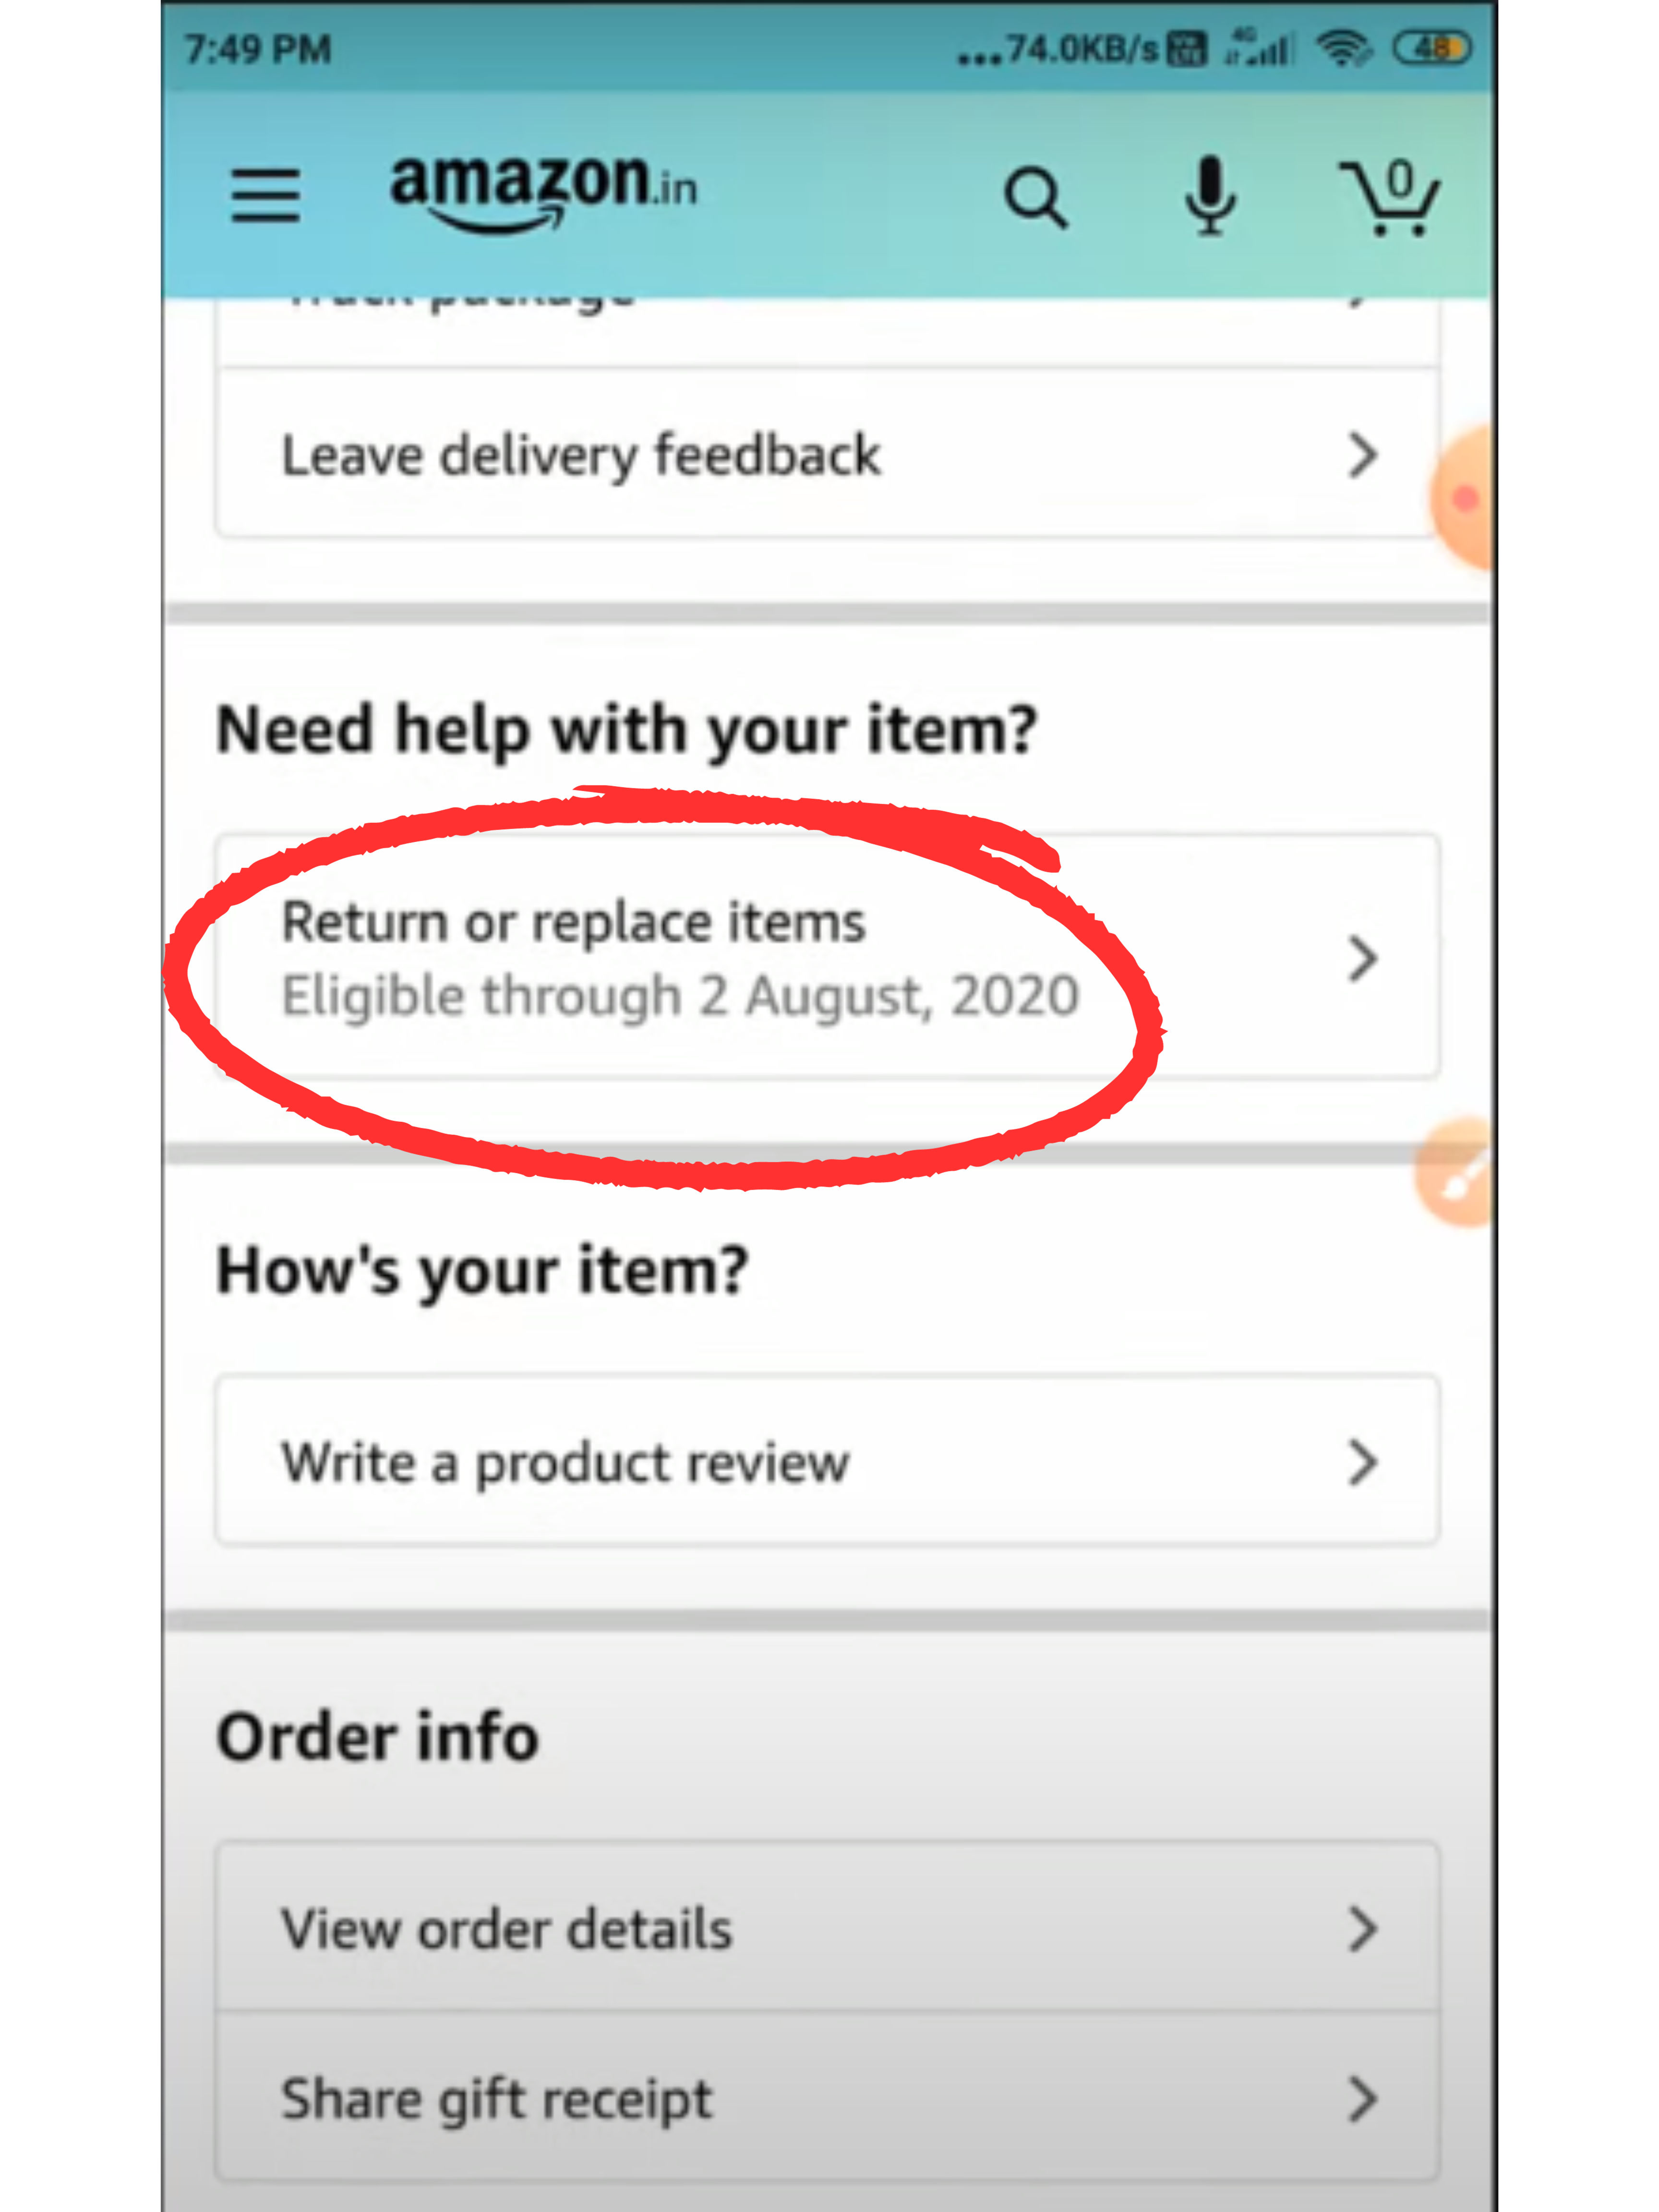 Click on "Return or Replace Items".